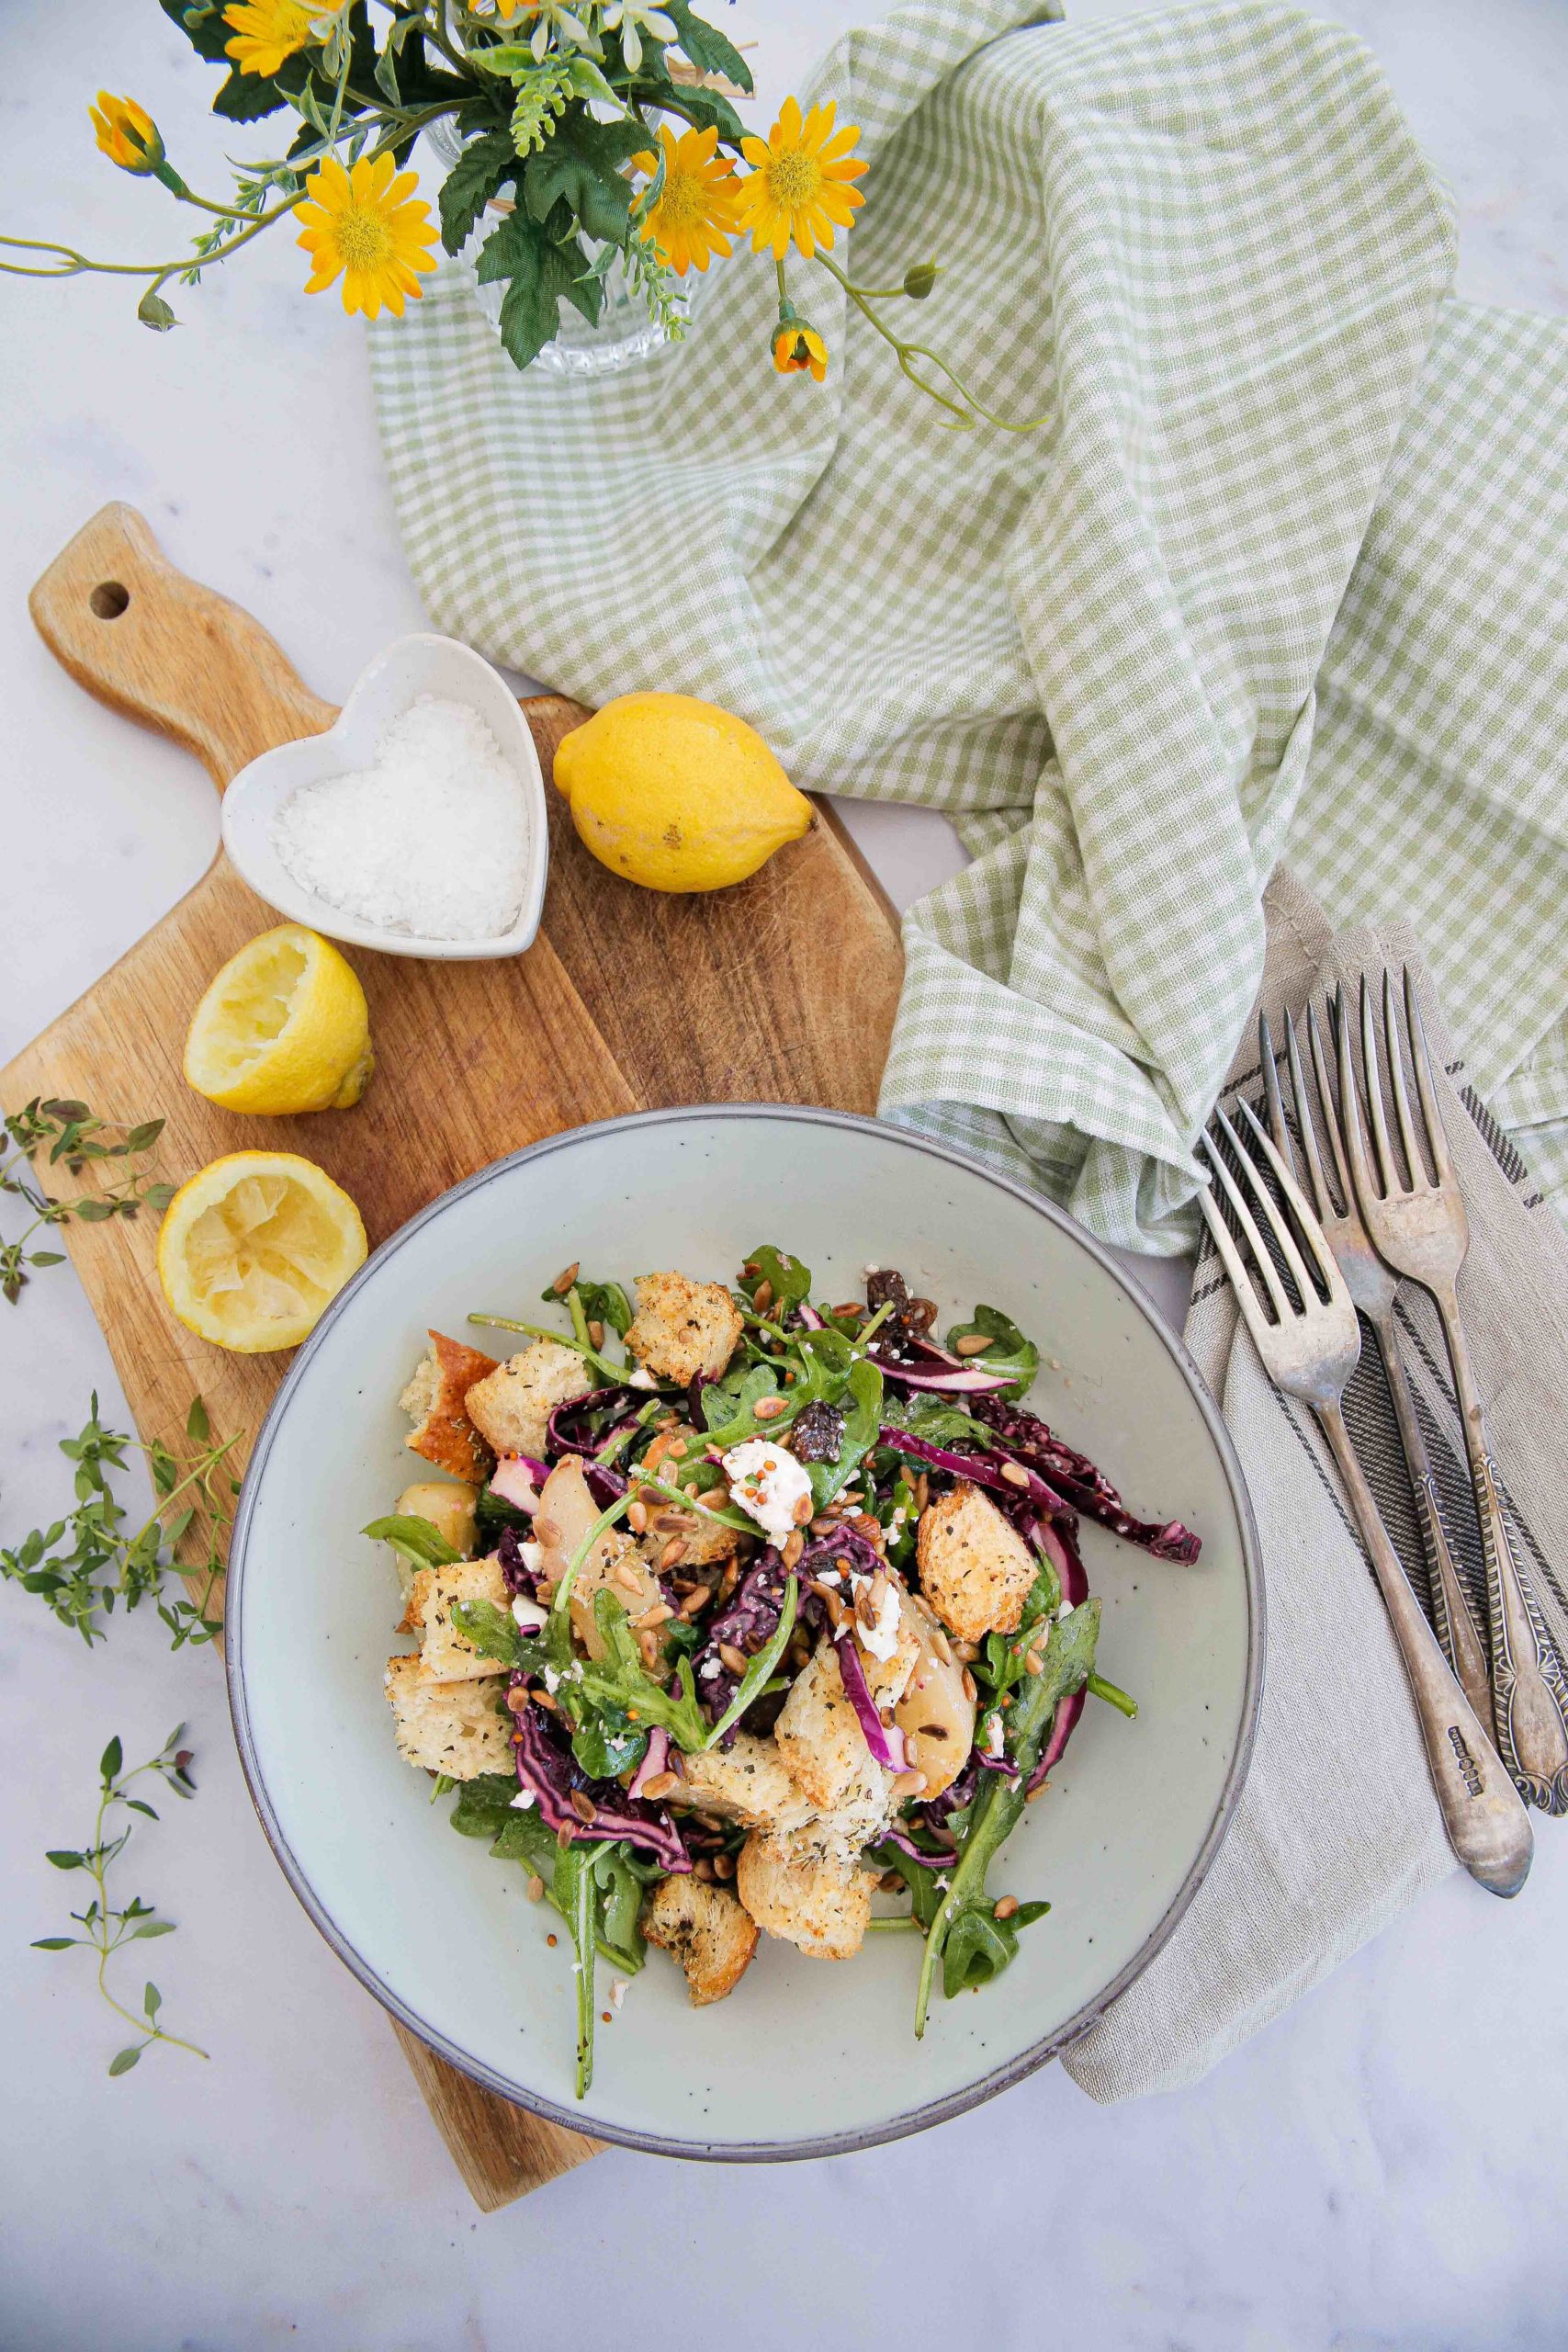 This pear salad will easily become a seasonal favourite! Made with roasted pears, red cabbage, homemade croutons and a tangy mustard dressing. Recipe on thecookandhim.com #pearsalad #redcabbage #arugula #rocket #stalebread #homemadecroutons